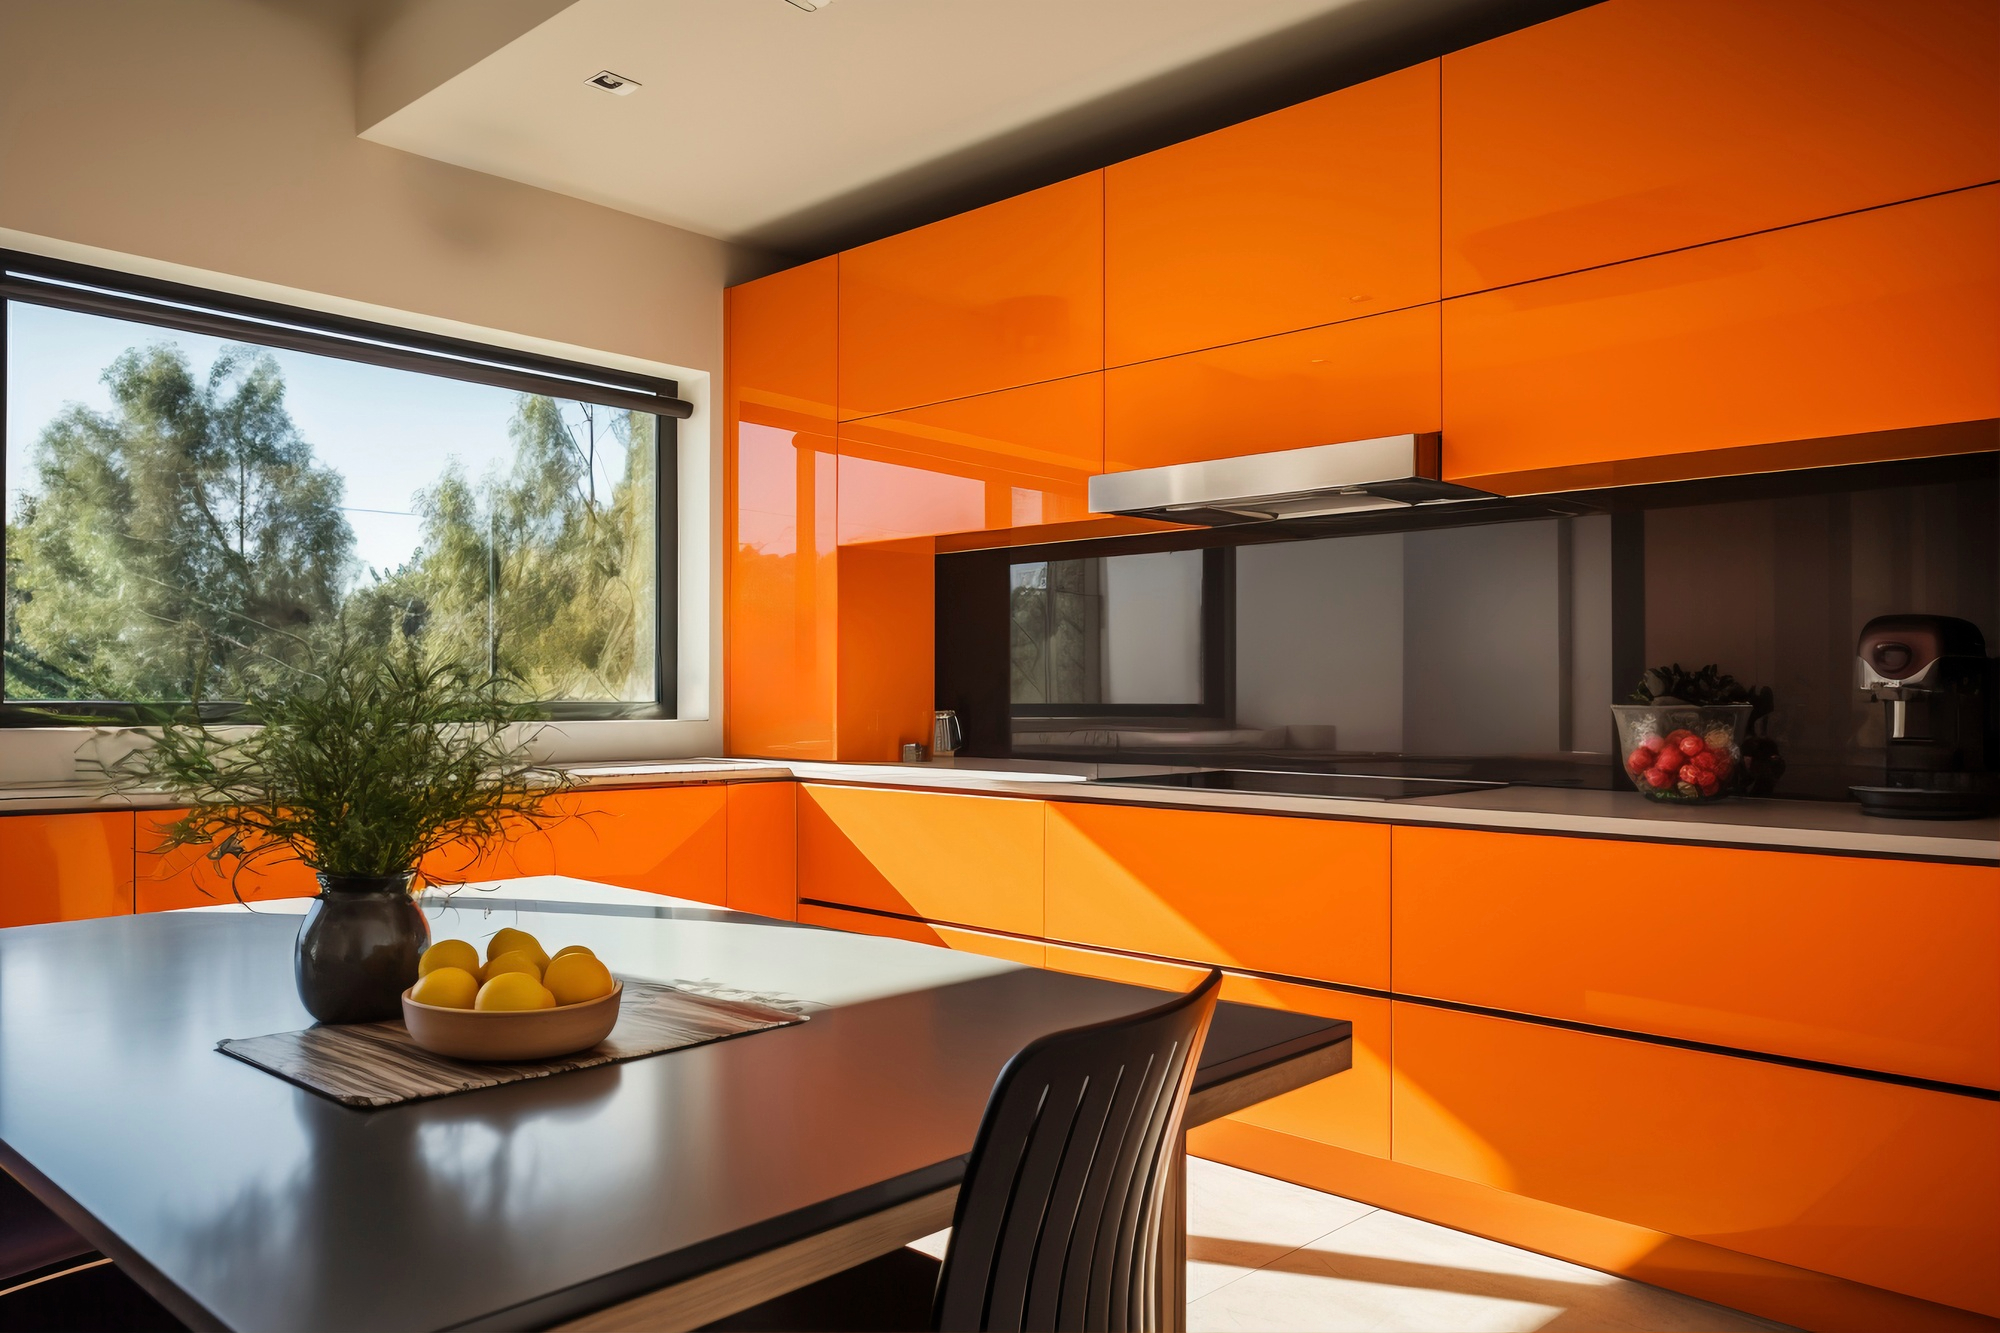 How Modular Kitchen Sunmica Designs Can Define Your Home?